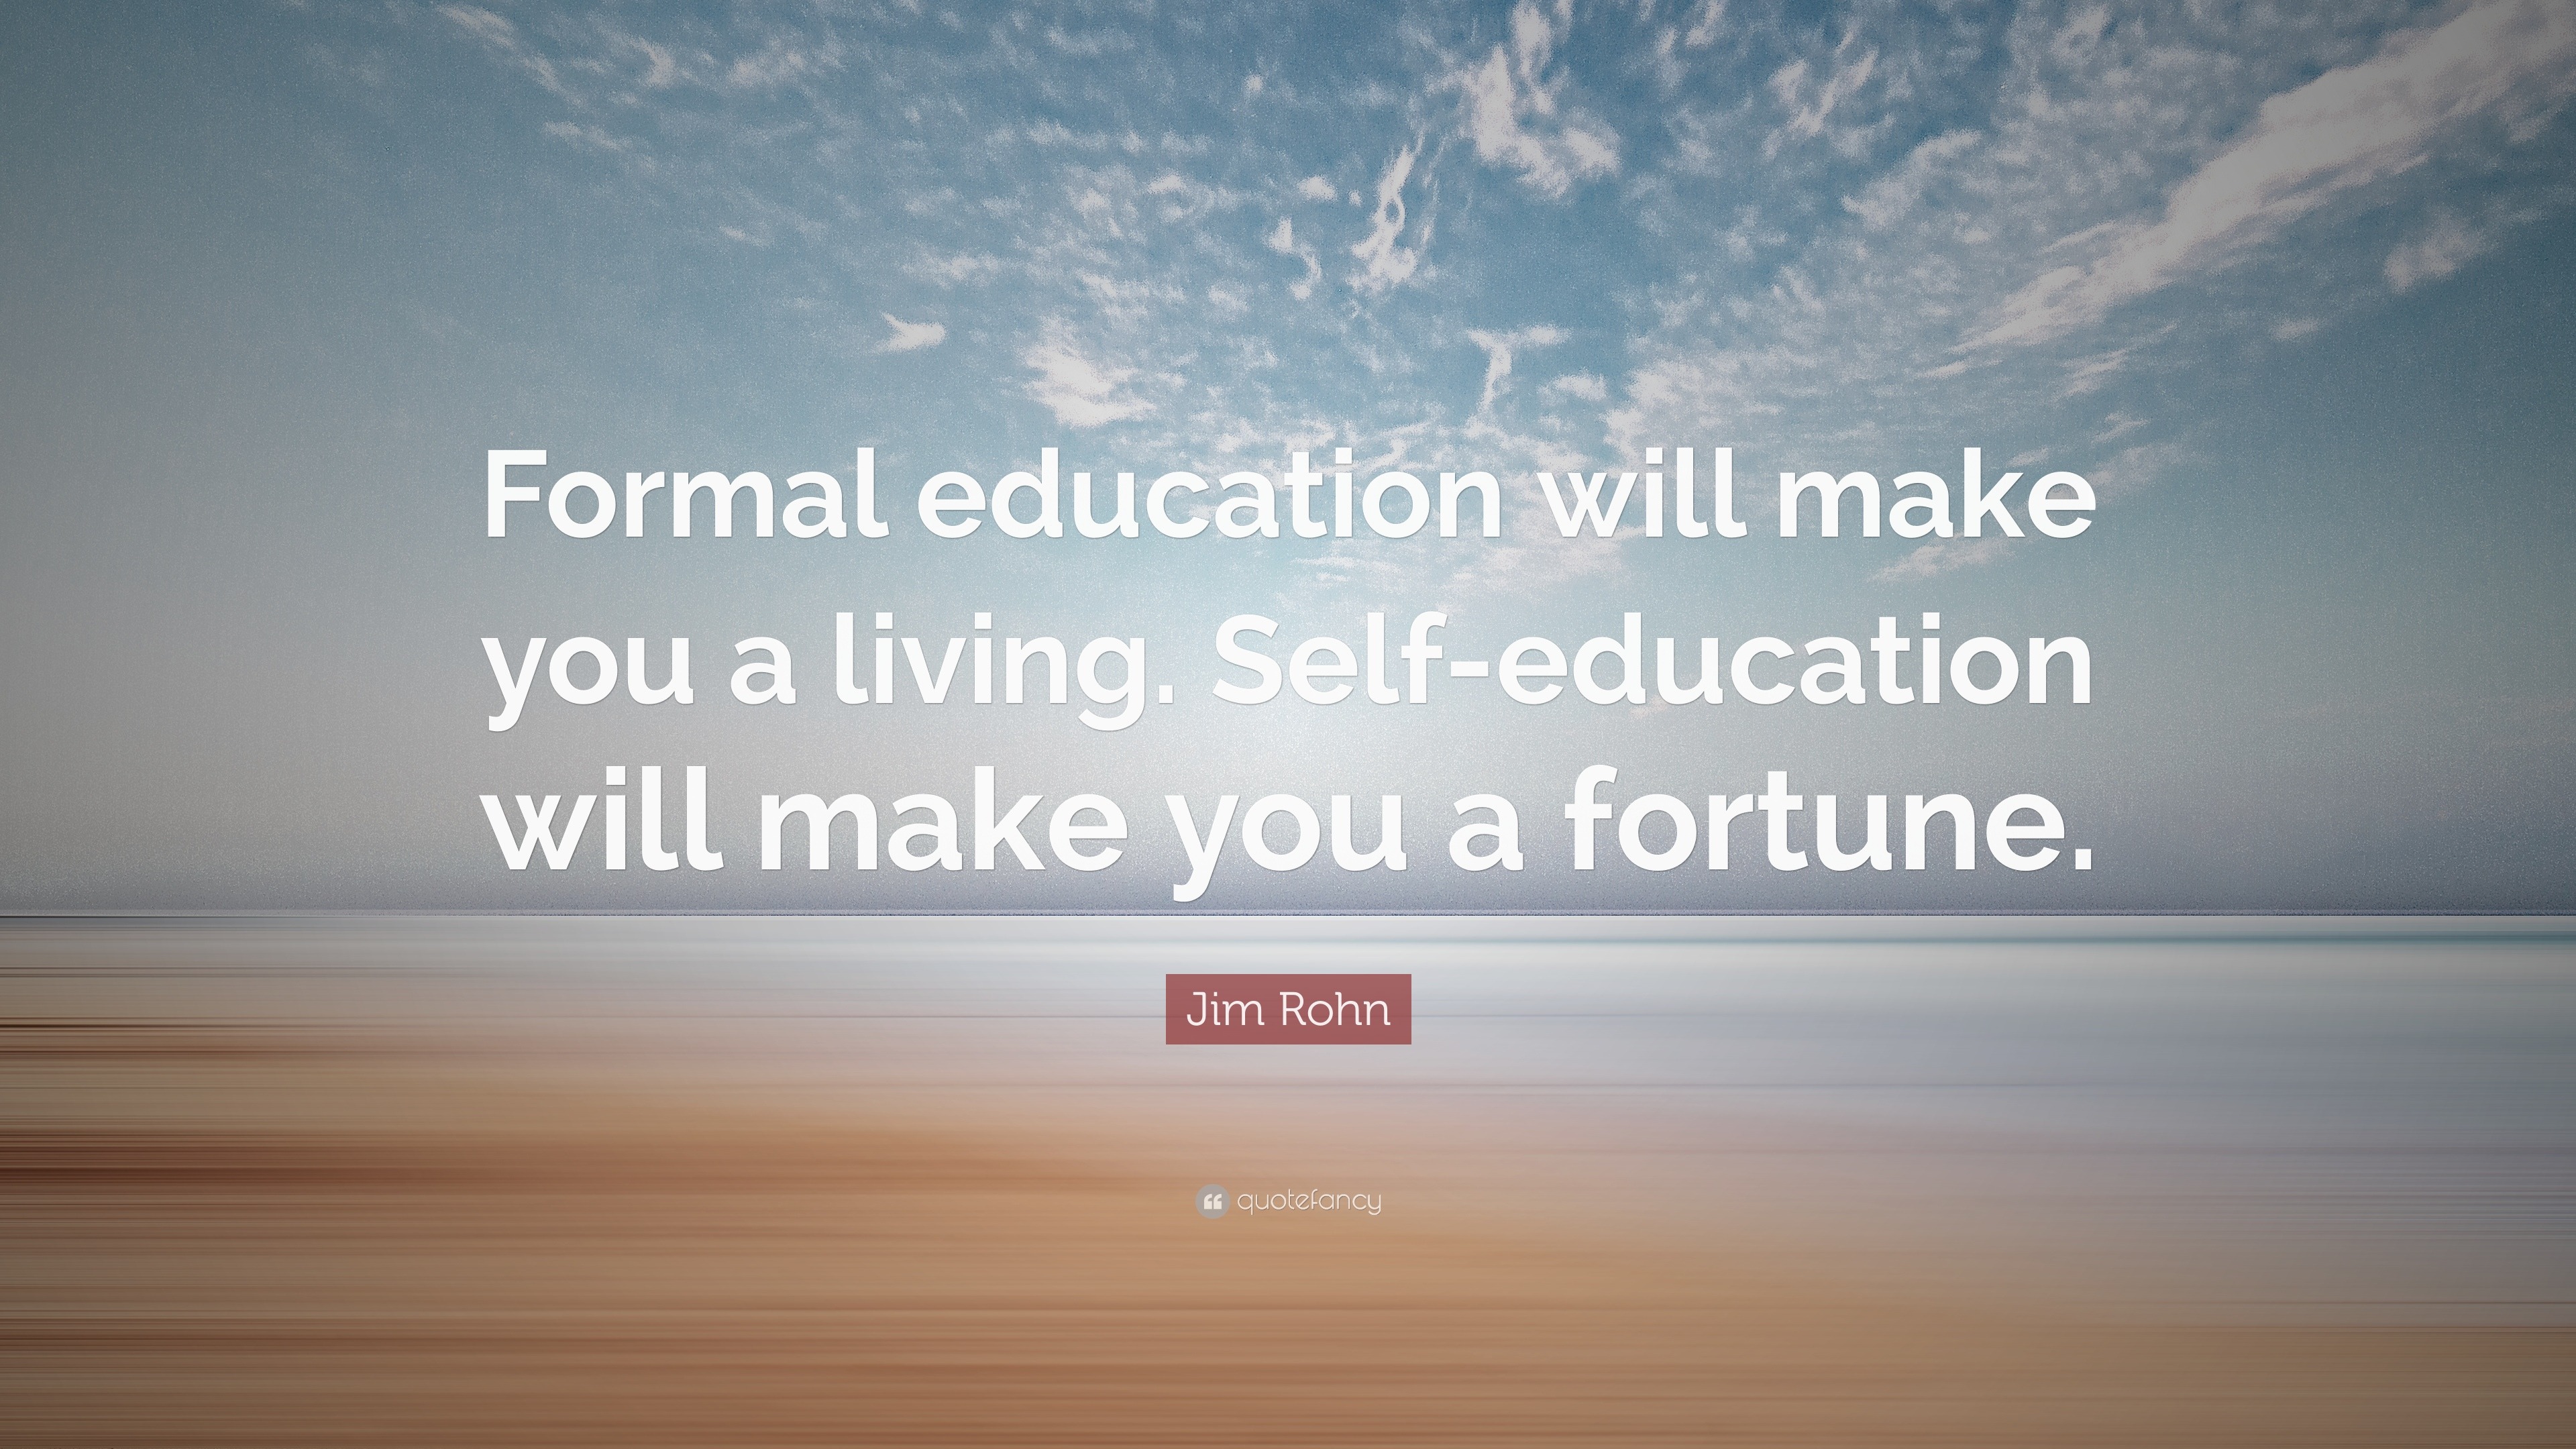 Jim Rohn Quote: “Formal education will make you a living. Self